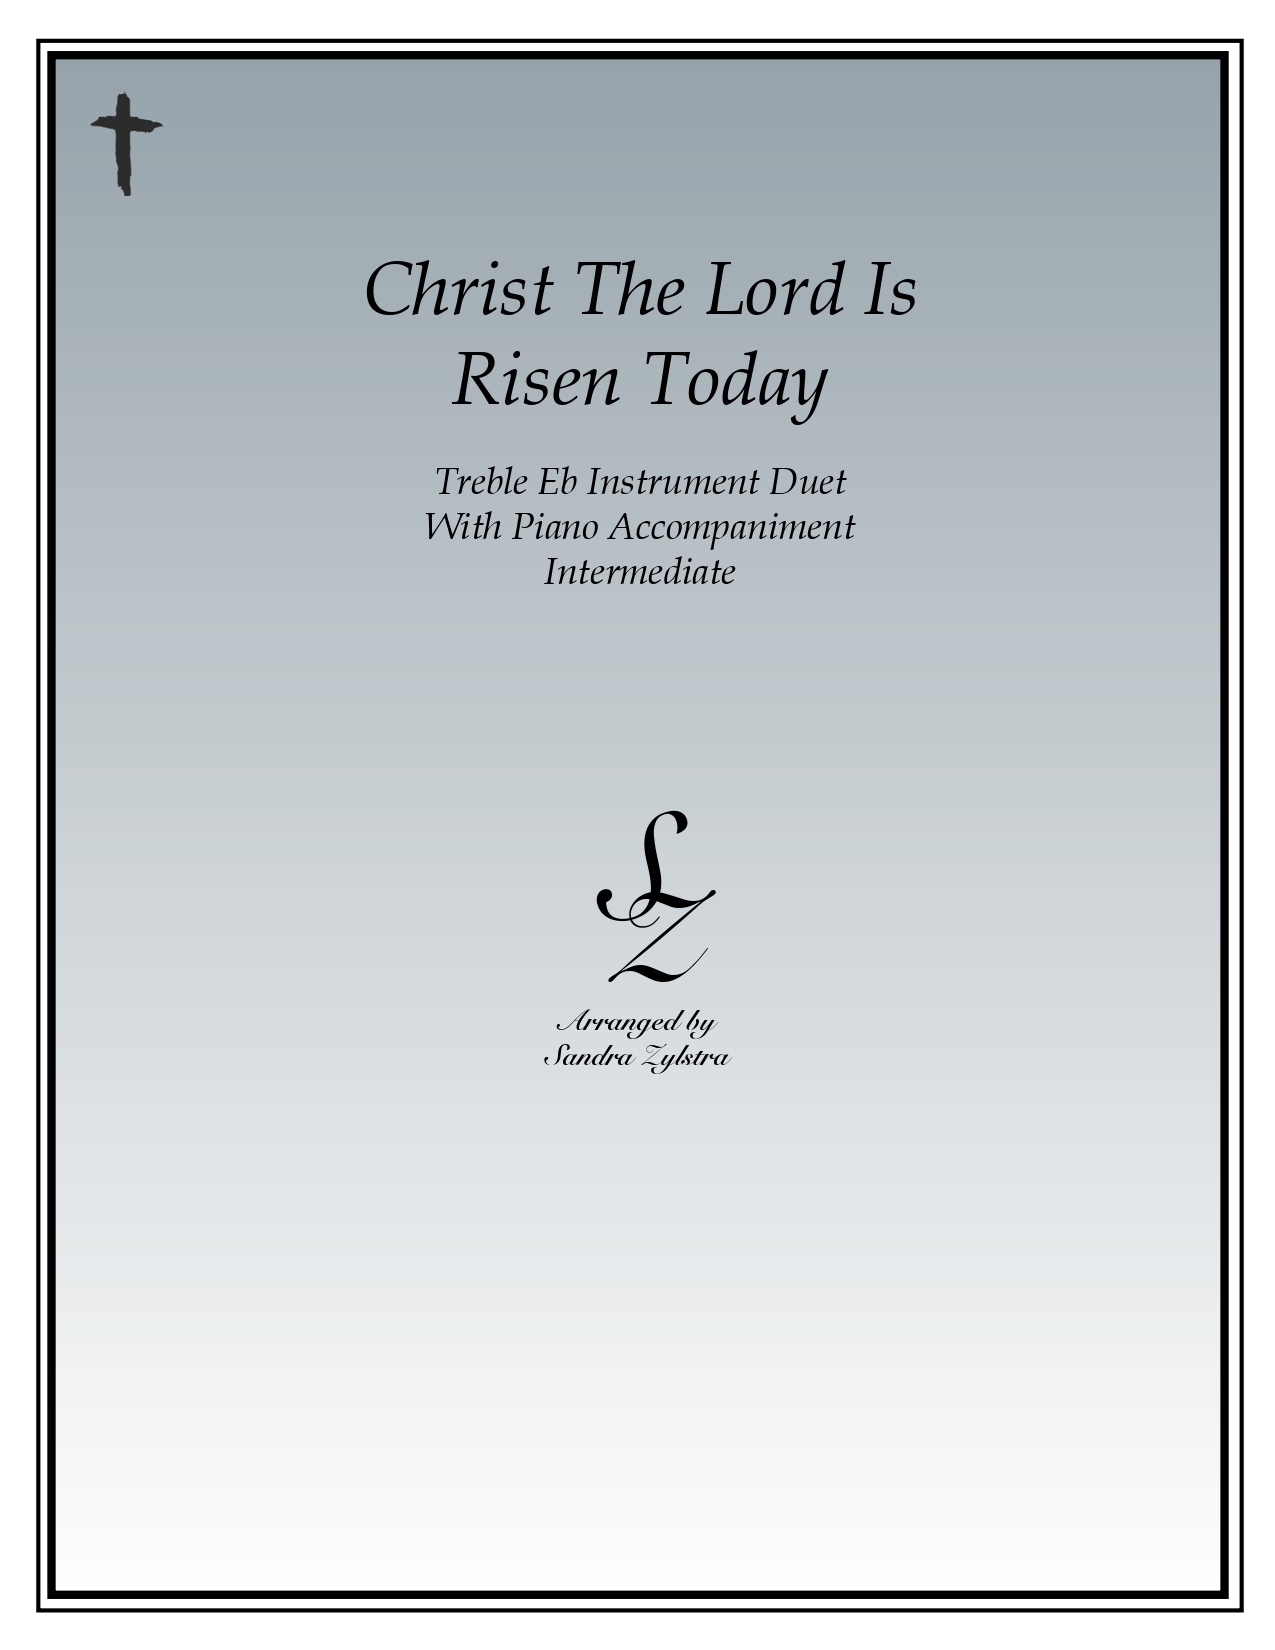 Christ The Lord Is Risen Today Eb instrument duet parts cover page 00011